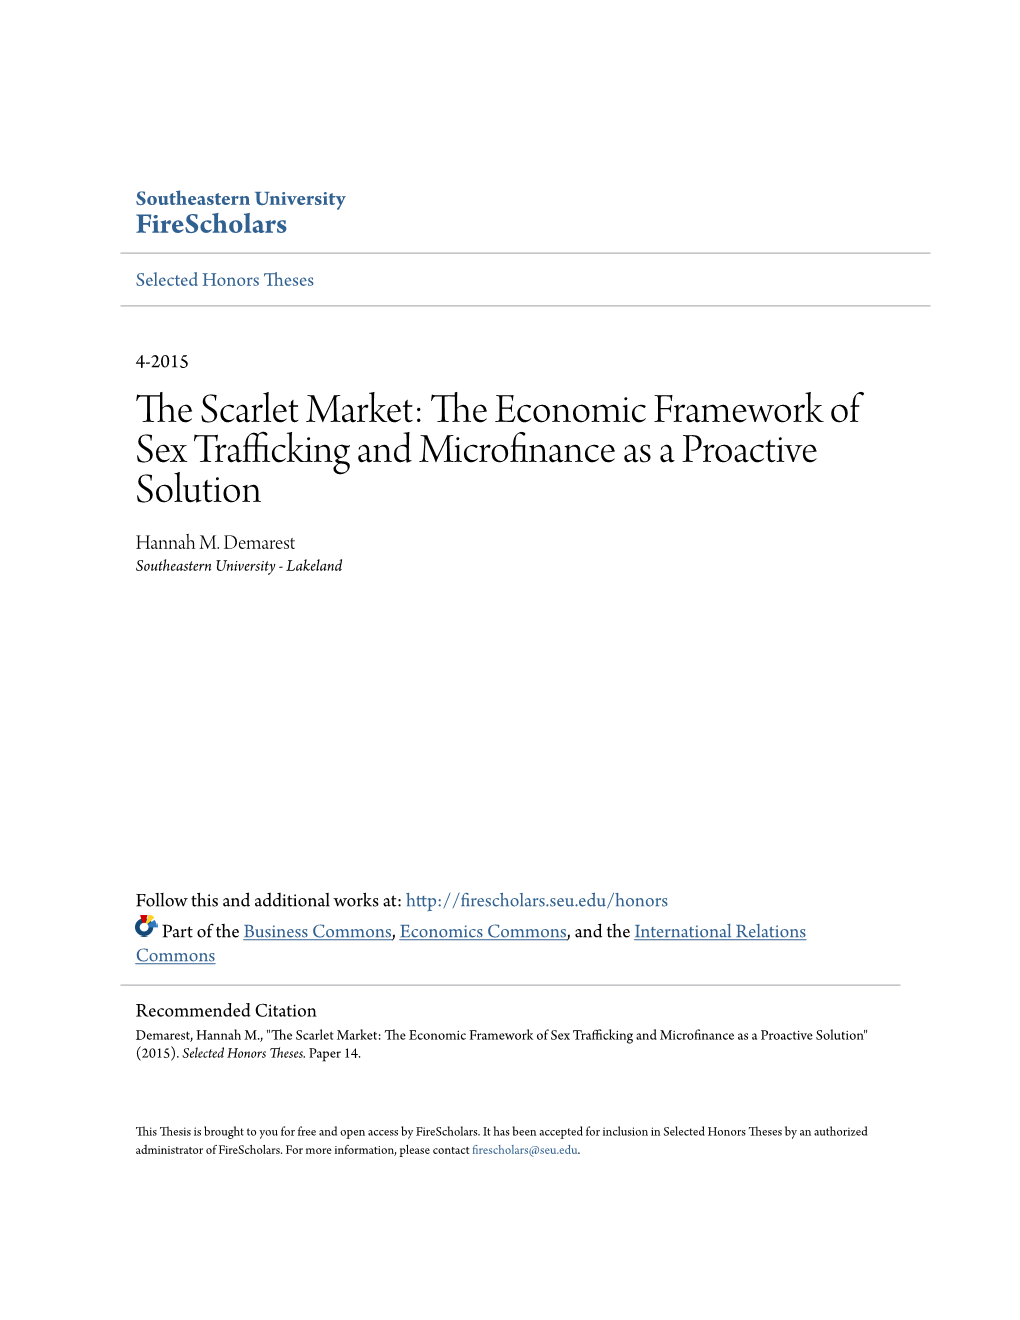 The Economic Framework of Sex Trafficking and Microfinance As A